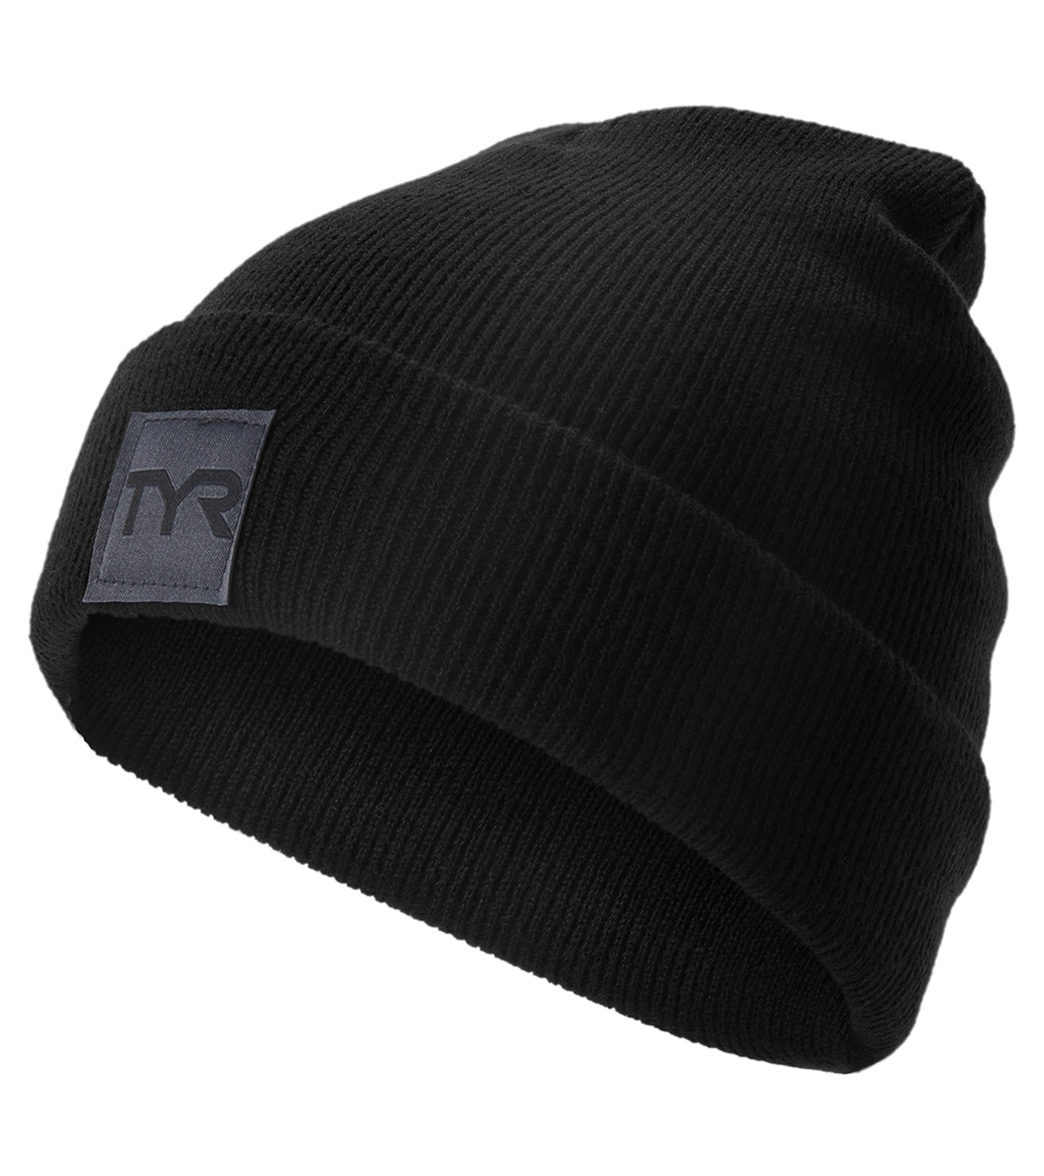 TYR Insulated Cuffed Beanie - Black One Size - Swimoutlet.com